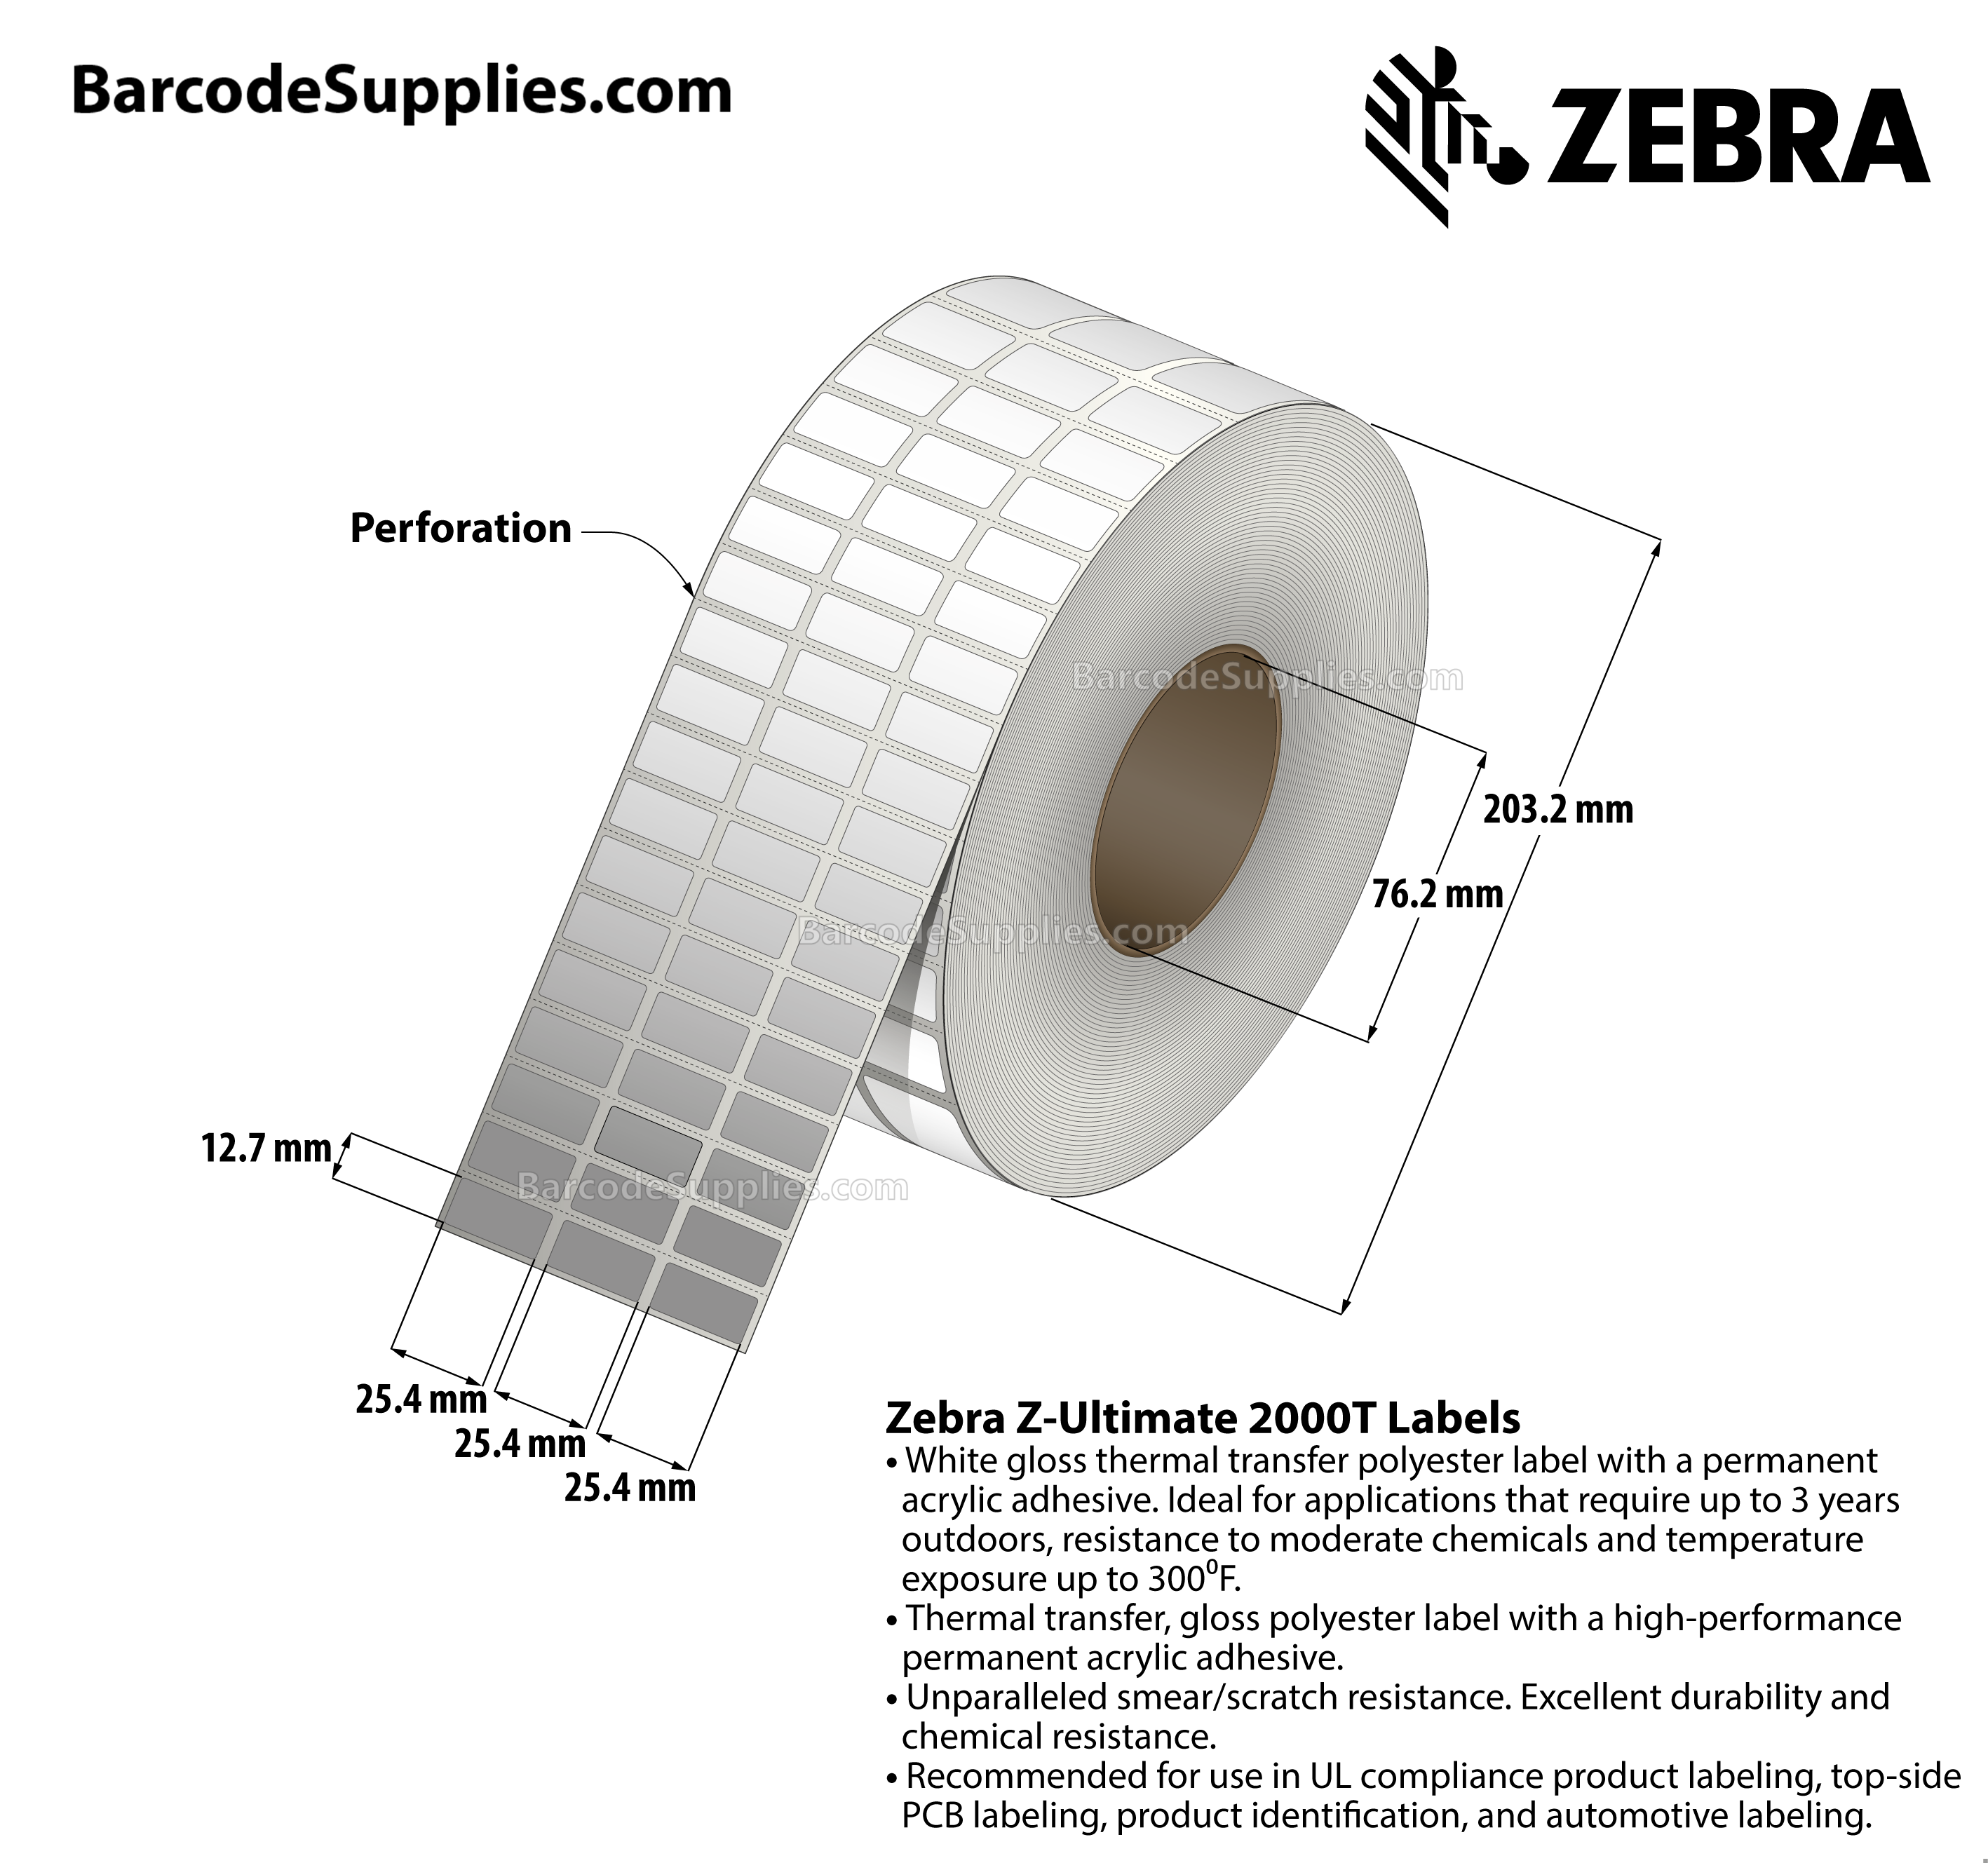 1 x 0.5 Thermal Transfer White Z-Ultimate 2000T (3-Across) Labels With Permanent Adhesive - Perforated - 10002 Labels Per Roll - Carton Of 1 Rolls - 10002 Labels Total - MPN: 10023012